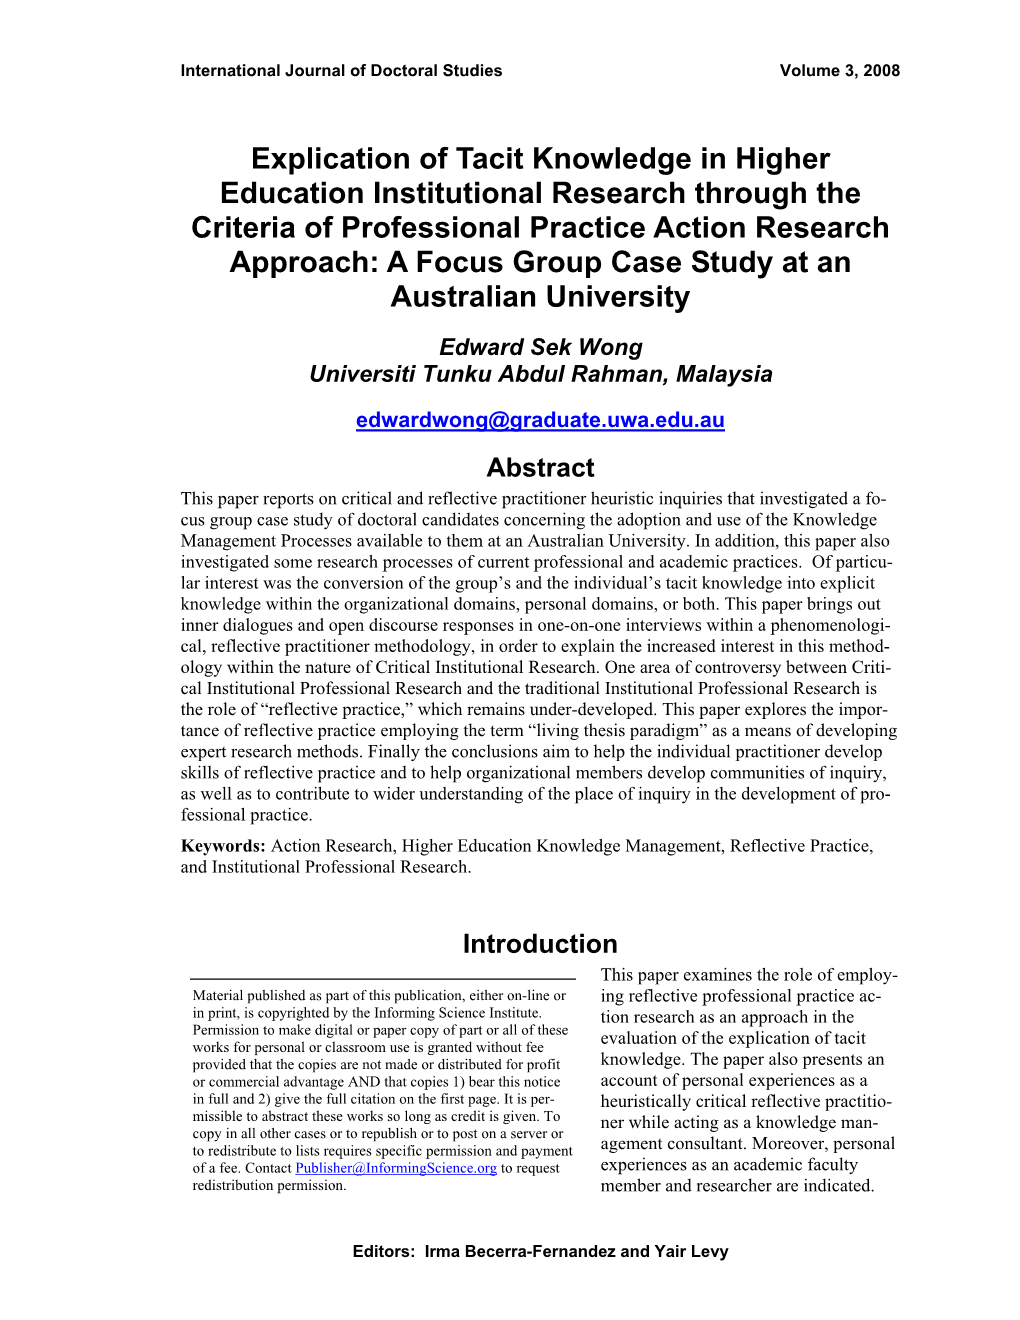 Explication of Tacit Knowledge in Higher Education Institutional